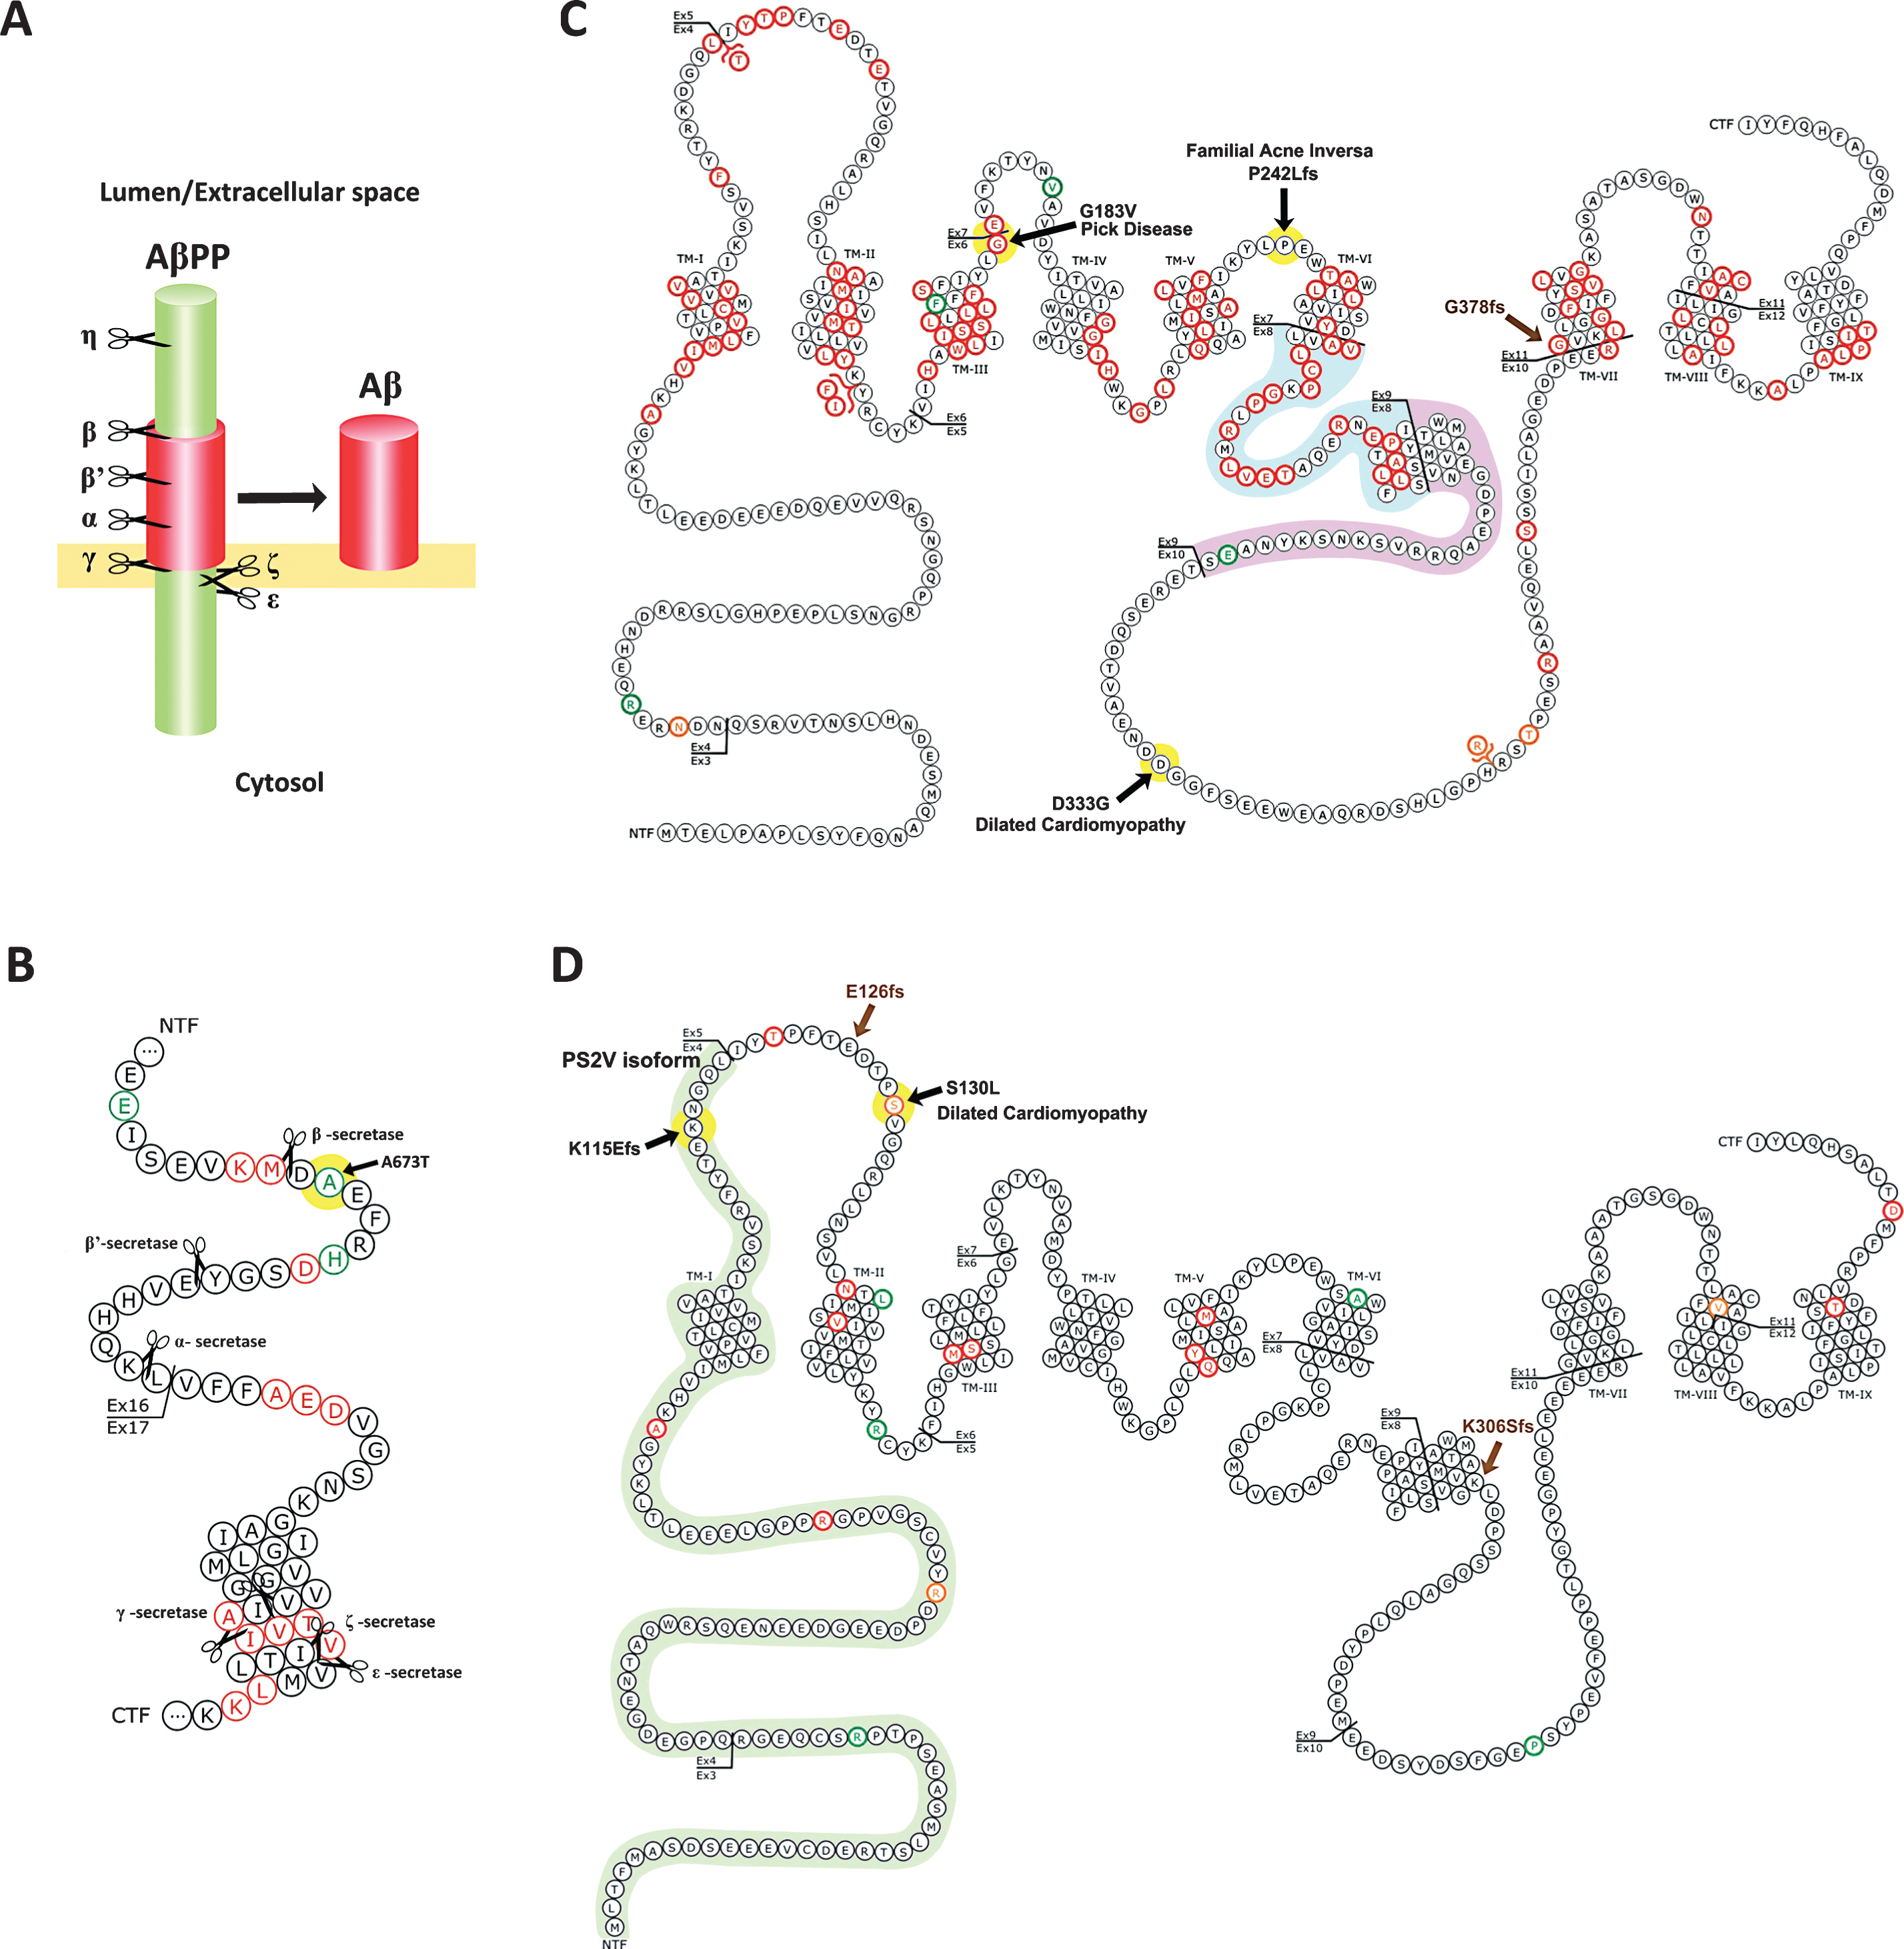 Disease-causing mutations in PSEN1, PSEN2 and AβPP. A) Cleavages of AβPP. β-Secretase cleavage at the β-site, not the β’-site, followed by γ-secretase cleavage is required to produce Aβ peptides. Panels B, C, and D are modifications of diagrams taken from the Alzheimer Disease & Frontotemporal Dementia Mutation Database [47]. Red amino acid residues are sites of pathogenic mutation causing dementia. Green residues are non-pathogenic variants. The pathogenic nature of orange residues is unclear. Transmembrane domains (TM) and residues encoded by particular exons (Ex) are indicated and numbered. B) Mutations and cleavage sites in AβPP in the region of Aβ. Mutations are thought to affect the level of production of Aβ by changing cleave site preference or affect the structure of Aβ, or both. The production of AICD may also be affected. The position of the “protective” A673T mutation [159] is highlighted with a yellow background. C) Mutations in PSEN1. Residues affected by mutations causing Pick Disease, Familial Acne Inversa and Dilated Cardiomyopathy are highlighted with a yellow background. Residues deleted by fAD mutations causing loss of exon 9 are highlighted with a pink background. The L271V mutation causes increased formation of a naturally-occurring PSEN1 isoform lacking residues encoded by exon 8 (highlighted by a blue background) but it is the simultaneous expression of full-length PSEN1 containing the valine residue at position 271 that apparently causes fAD [51, 91]. D) Mutations in PSEN2. Residues included in the hypoxia-induced isoform PS2V are highlighted with a green background. The position of the unique frame-shift fAD mutation K115Efs and of the S130L mutation causing Dilated Cardiomyopathy are highlighted with yellow background. The “mutations” putatively identified by Kadmiri et al. [121, 122] are upstream of the region shown in B or are indicated with brown arrows and text in C and D.